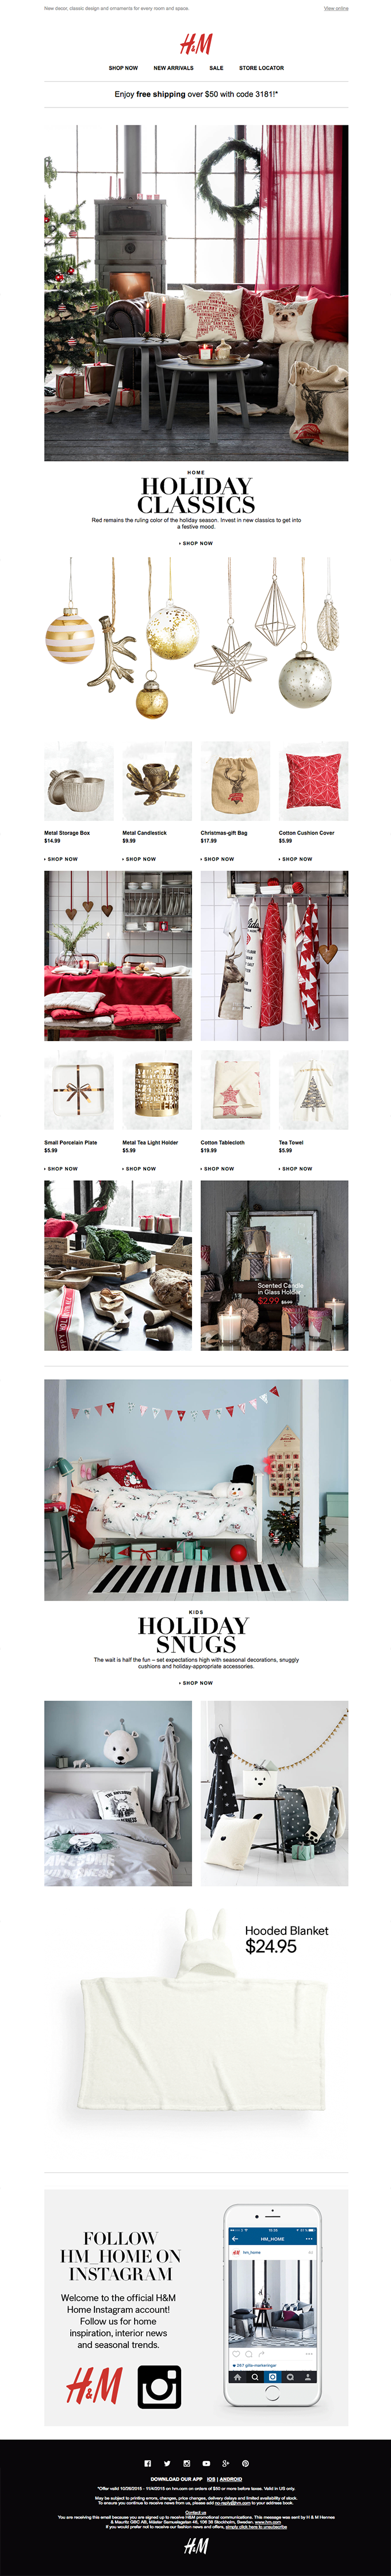 H M Home A Stylish Holiday At Home Really Good Emails